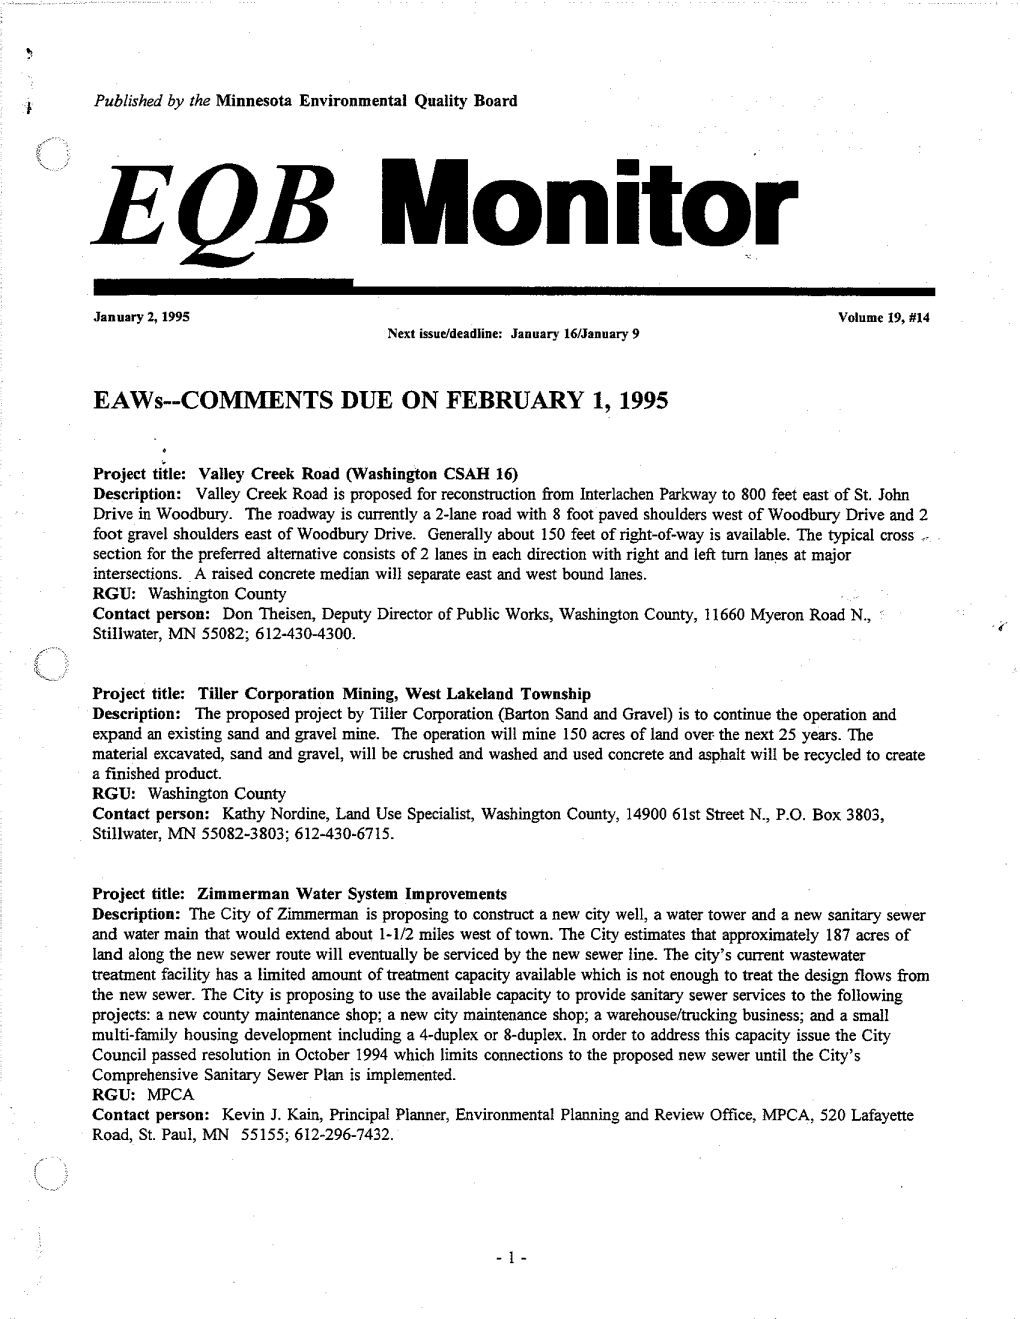 Eaws--Comments Due on February 1,1995